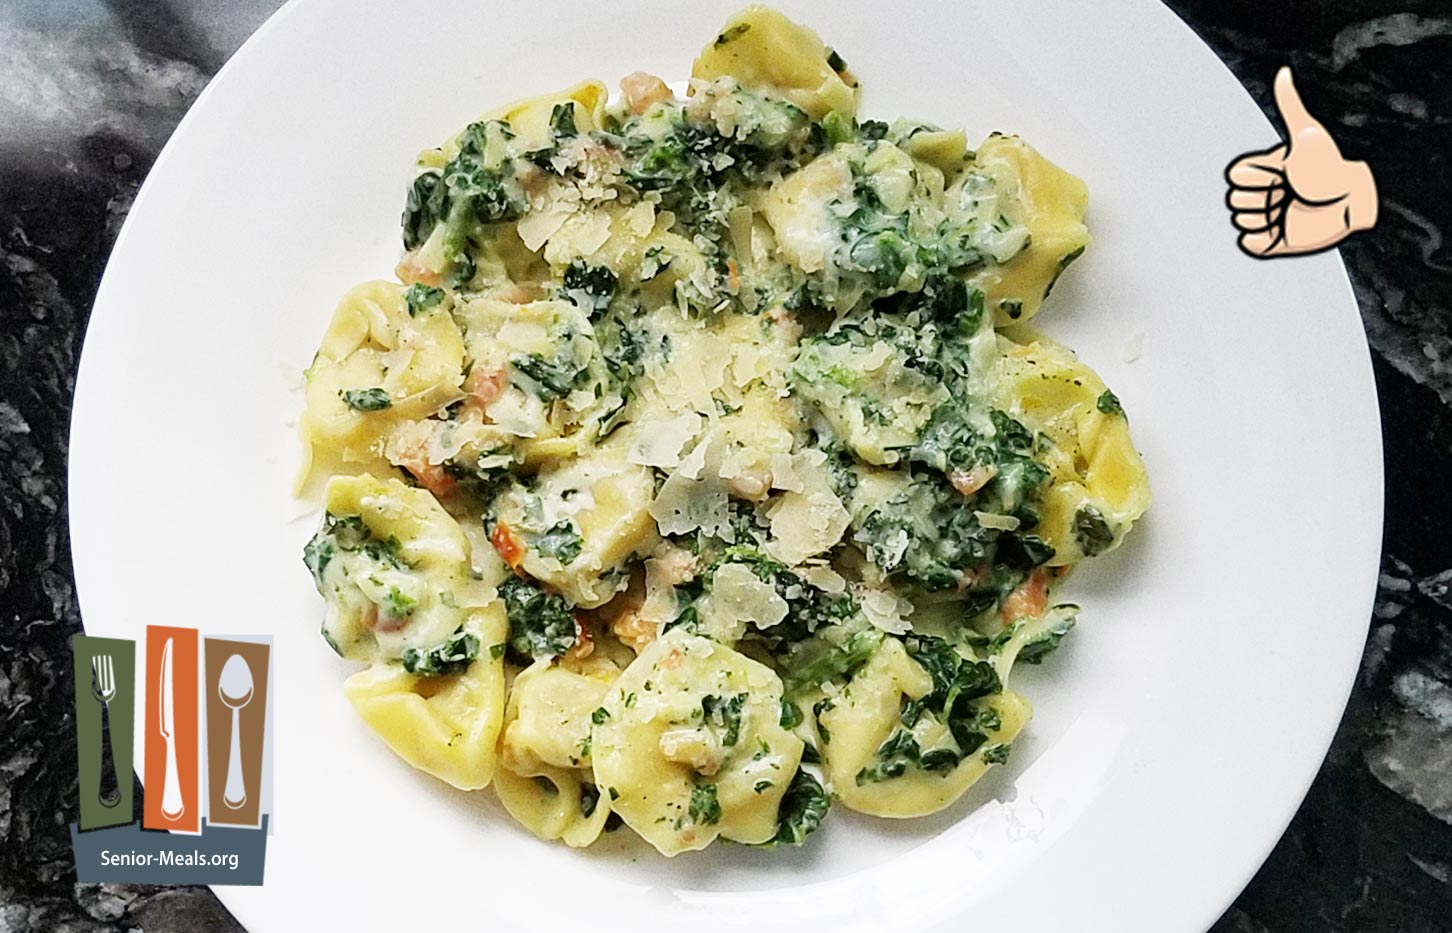 Spinach and Ricotta Tortelloni - $7